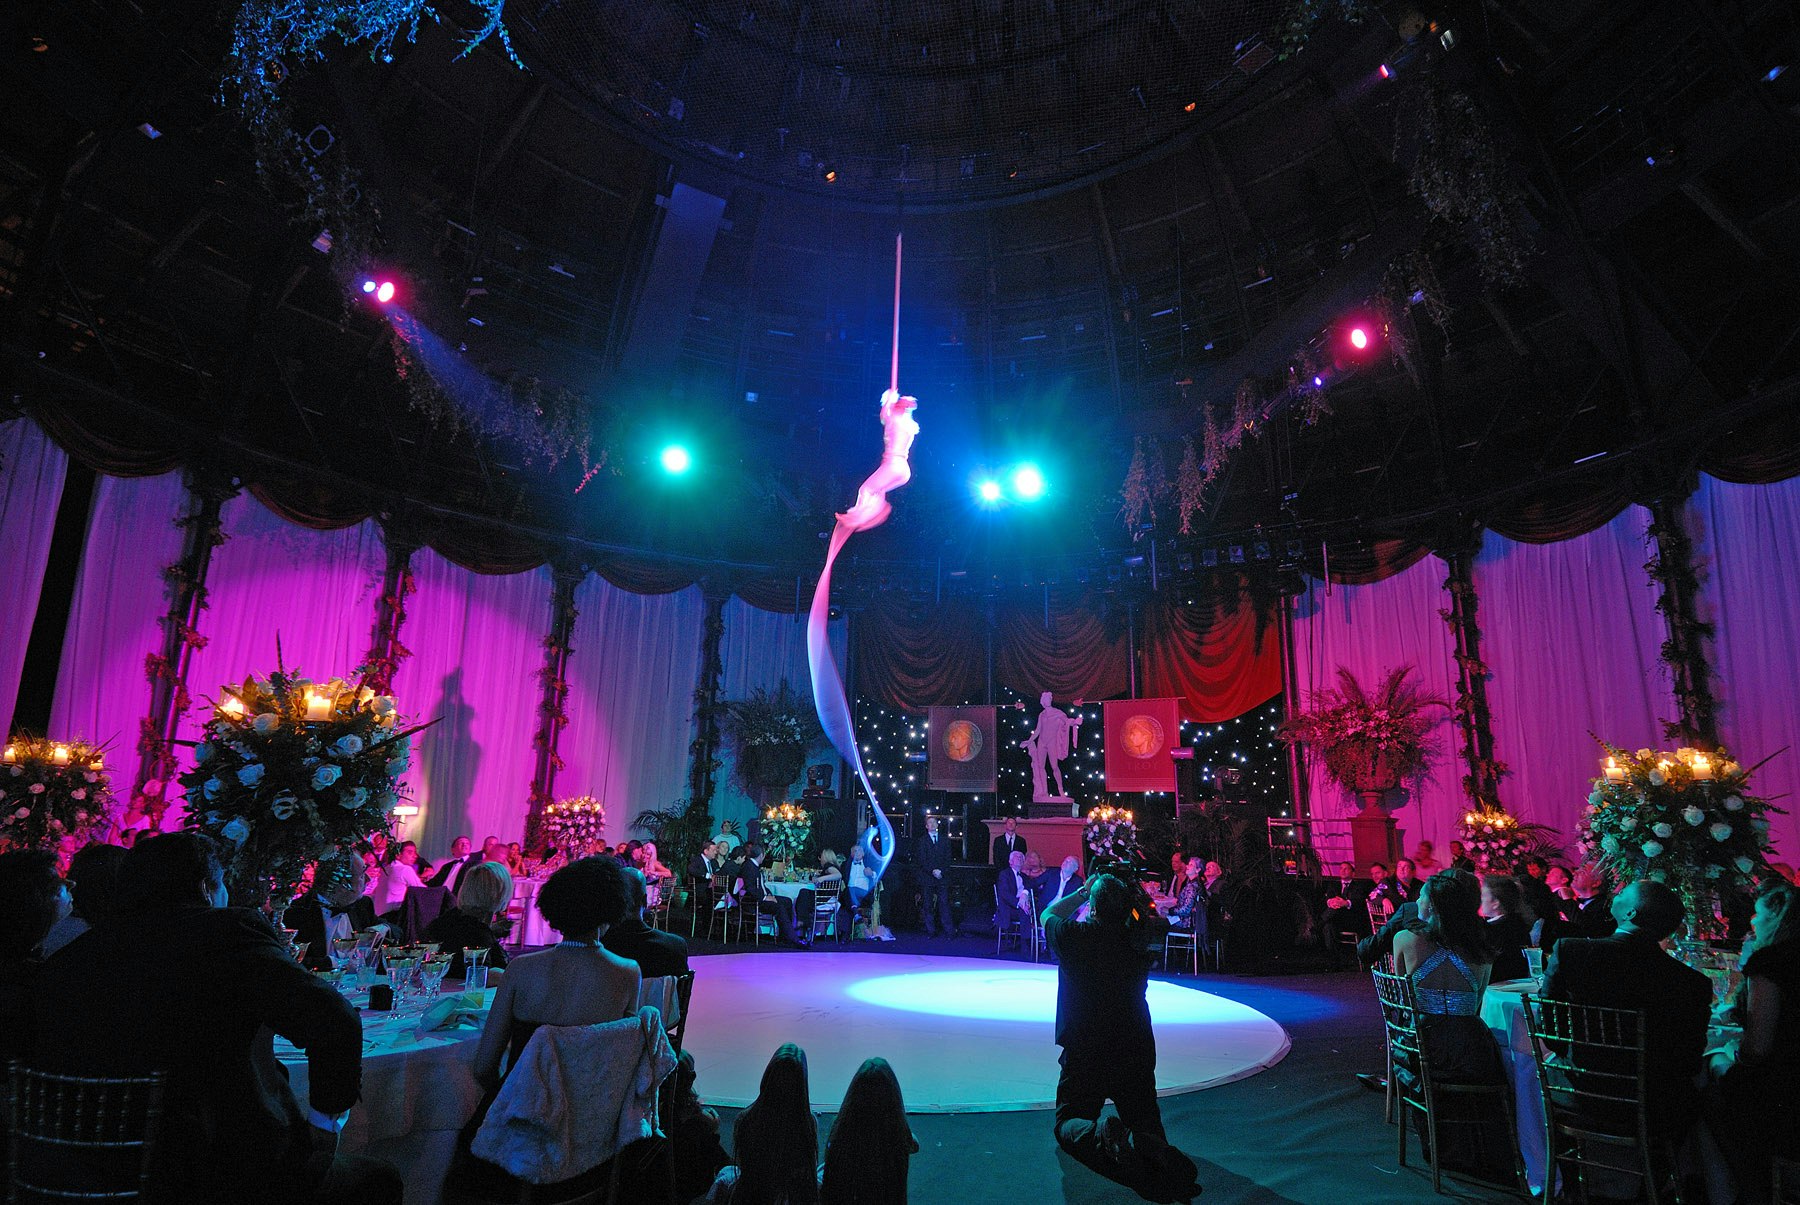 The Roundhouse aerial silk act